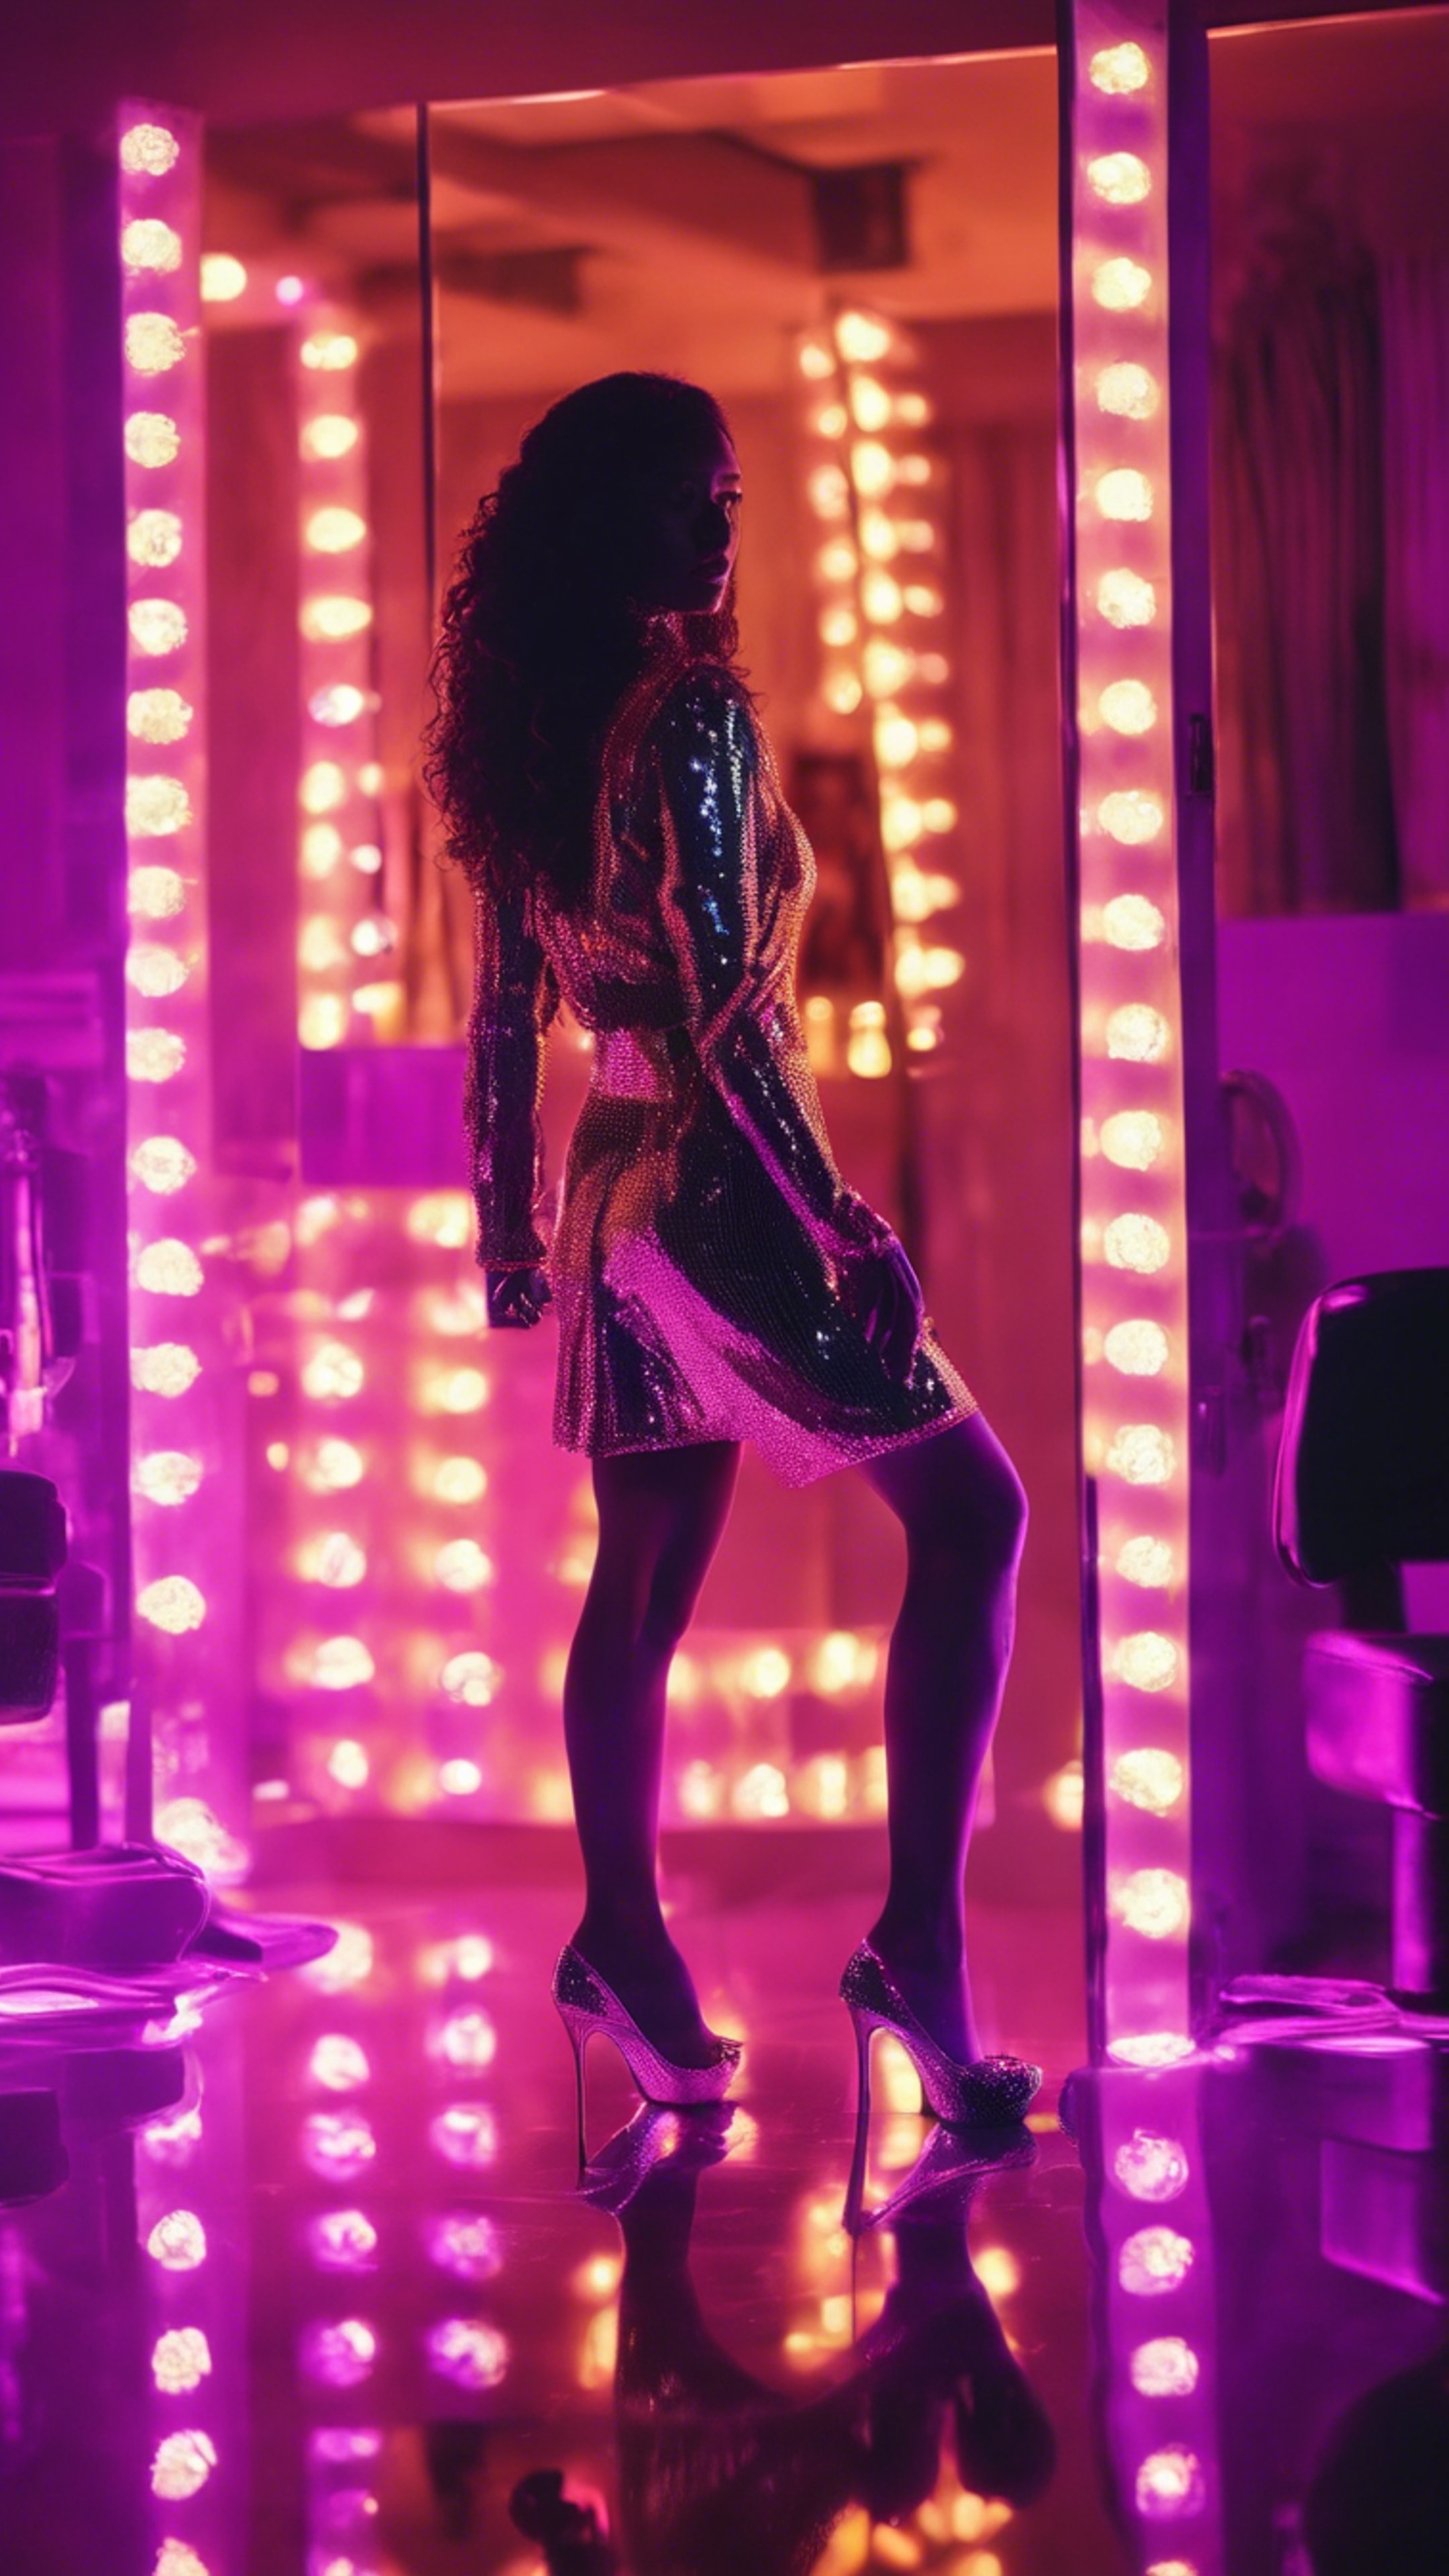 A confident baddie in a neon-lit room, dressed in sequins and high heels, her silhouette reflecting in the mirror. Behang[dd190a8a8fd944b882f7]